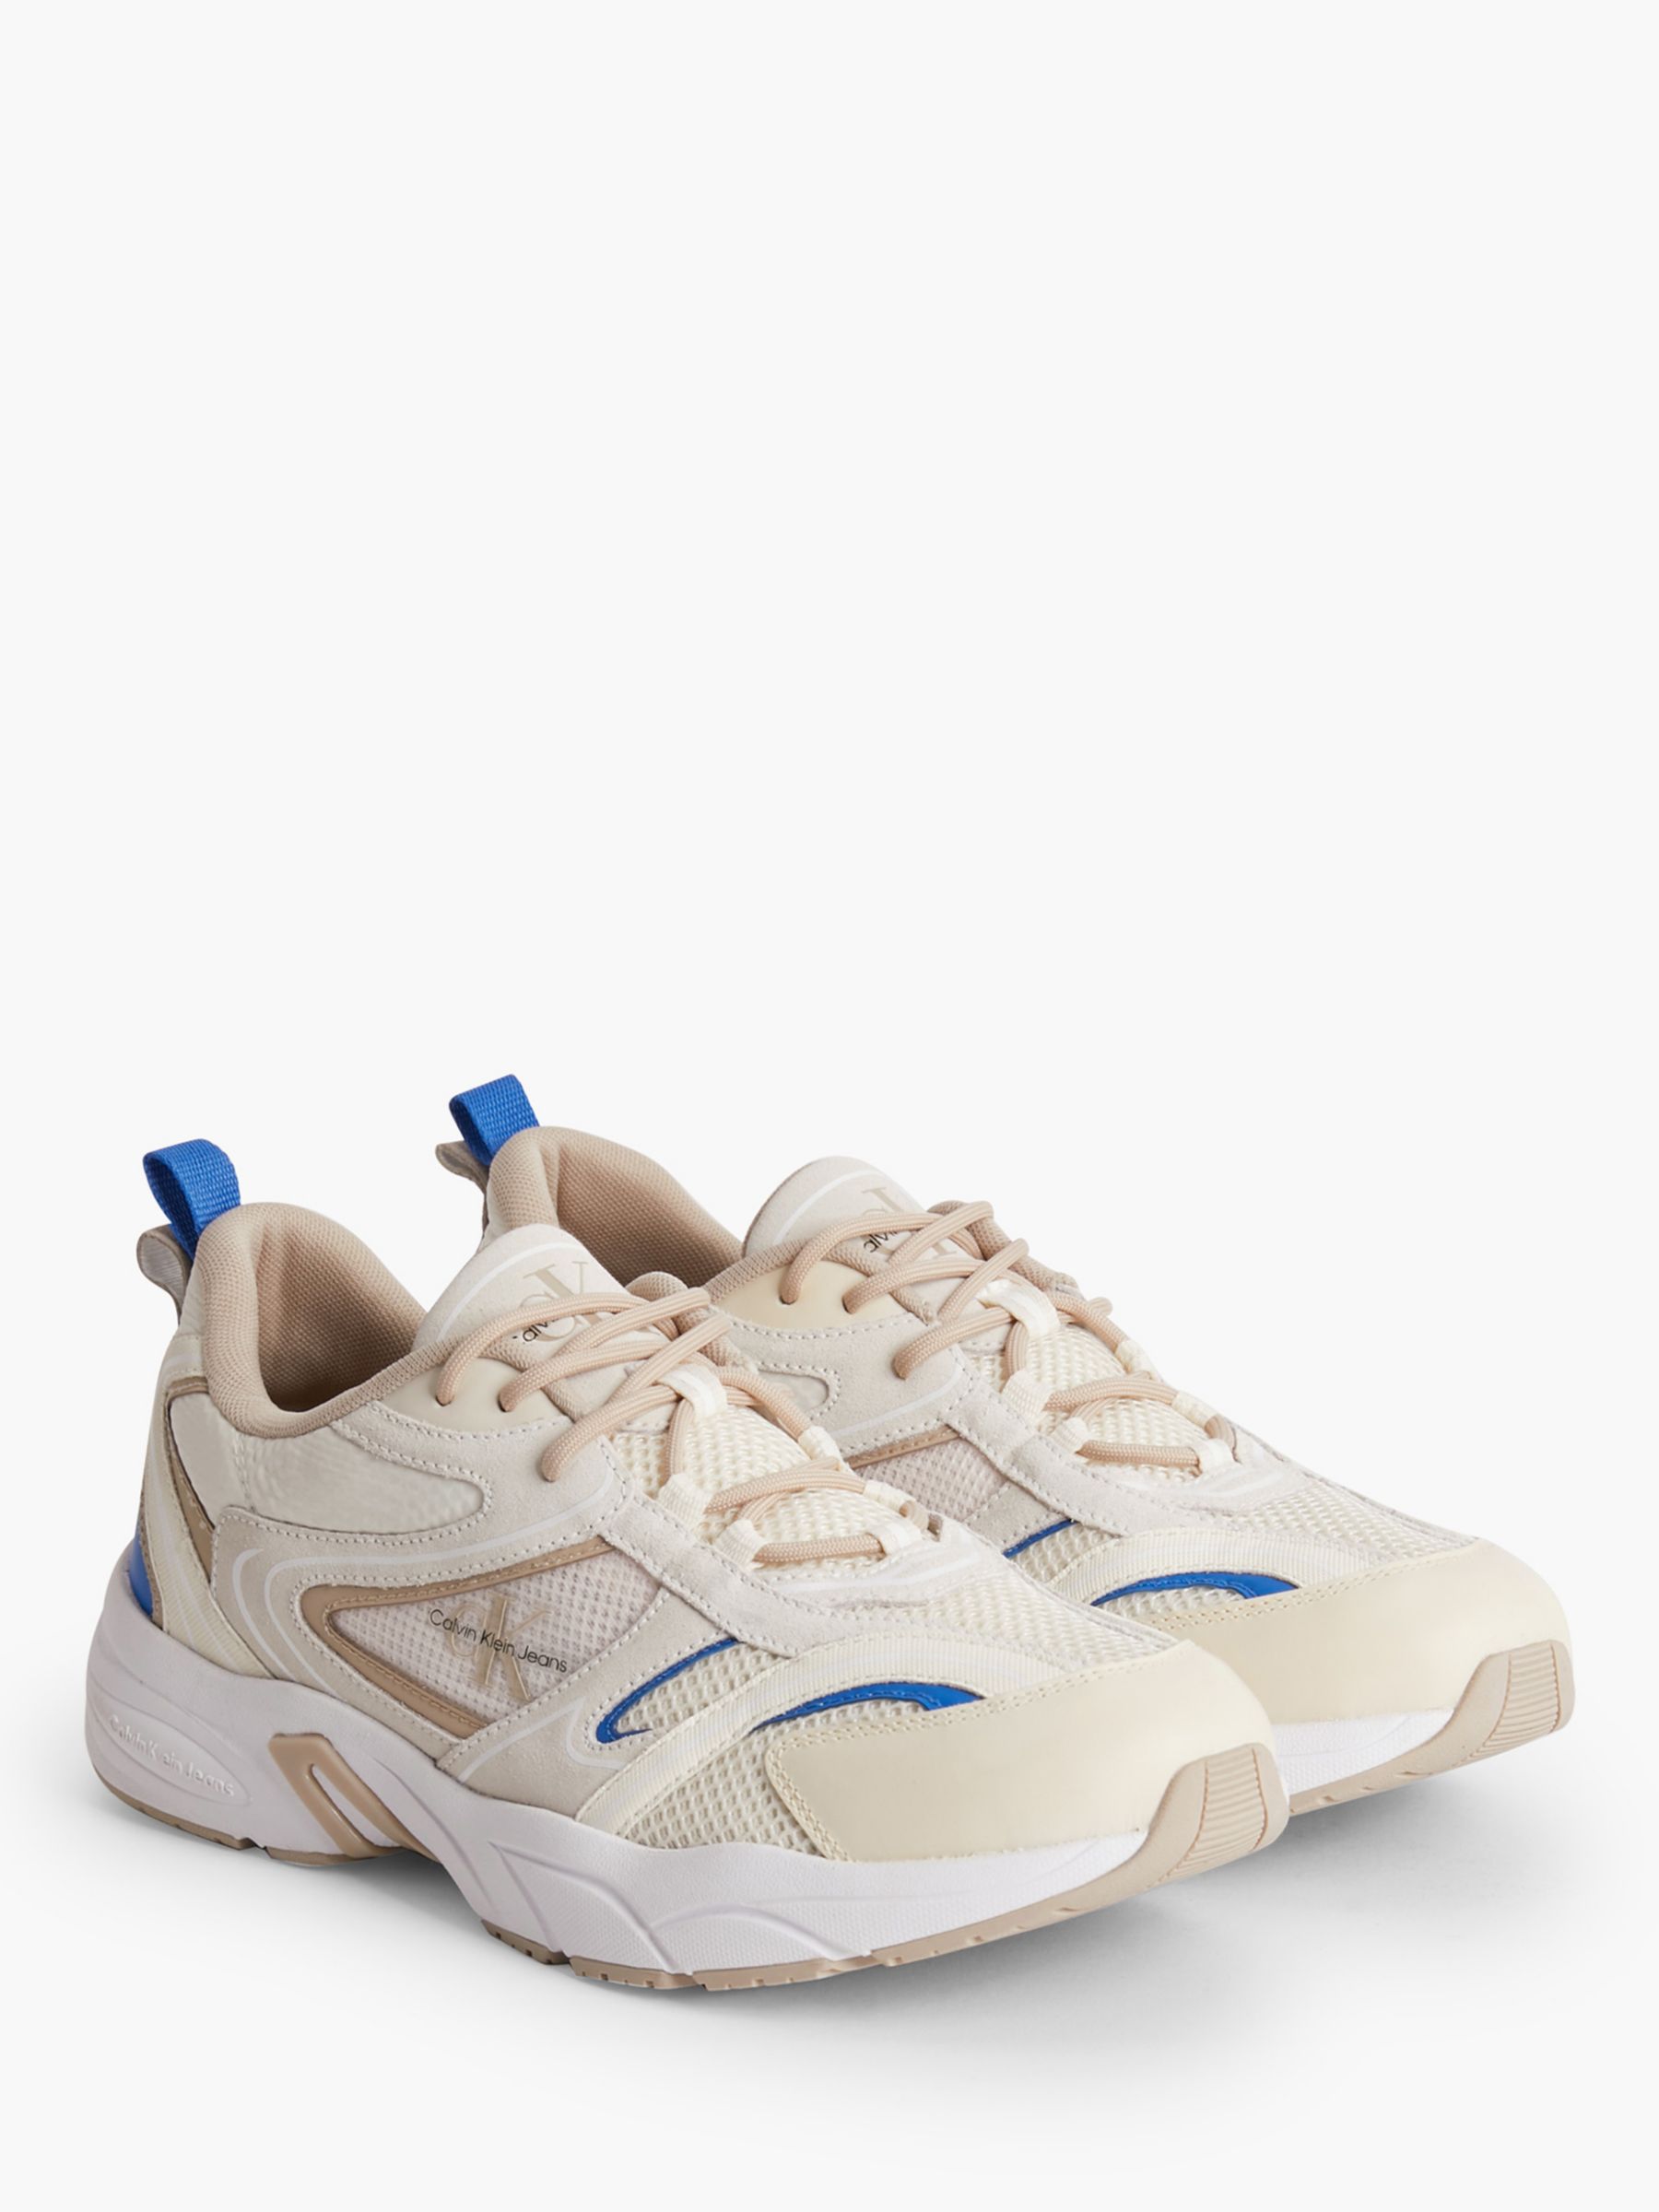 Buy Calvin Klein Leather Lace Up Tennis Trainers, Creamy White/Merino Online at johnlewis.com